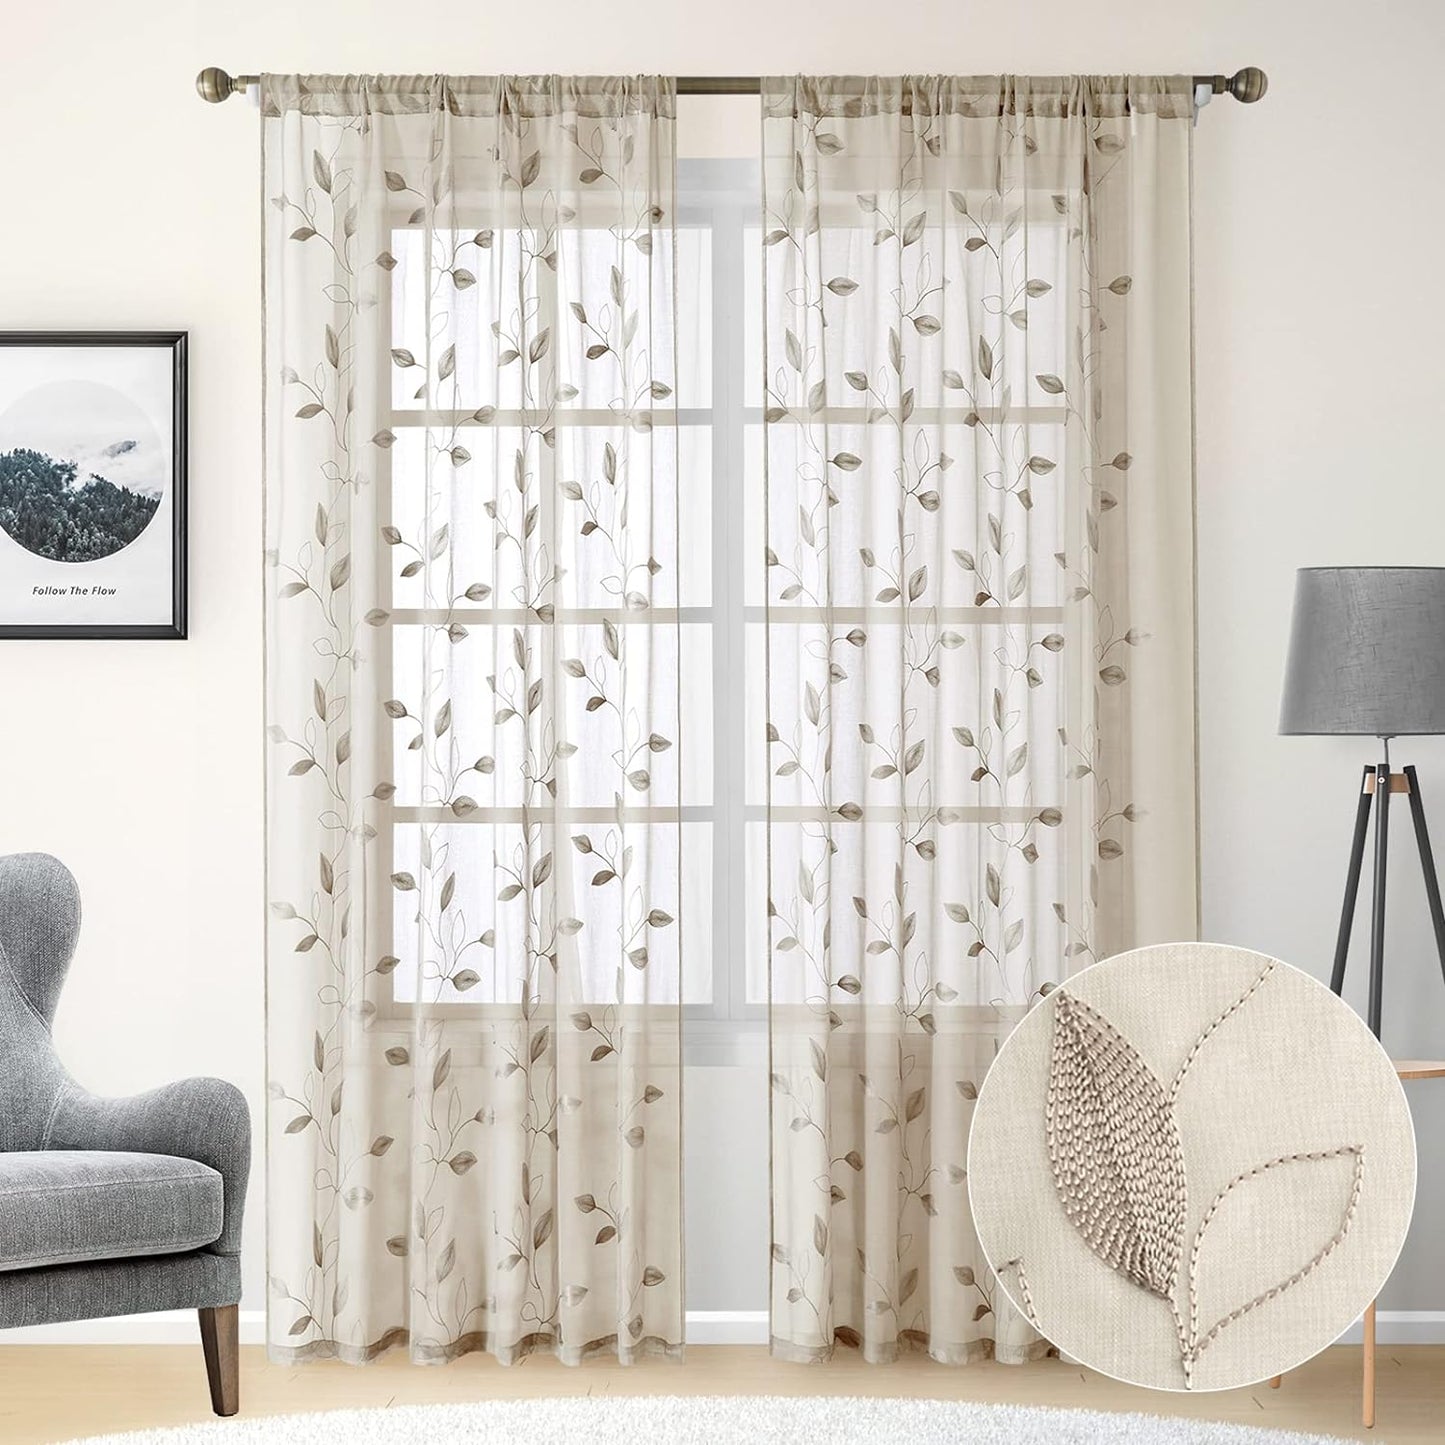 HOMEIDEAS Sage Green Sheer Curtains 52 X 63 Inches Length 2 Panels Embroidered Leaf Pattern Pocket Faux Linen Floral Semi Sheer Voile Window Curtains/Drapes for Bedroom Living Room  HOMEIDEAS 2-Taupe/Beige W52" X L84" 